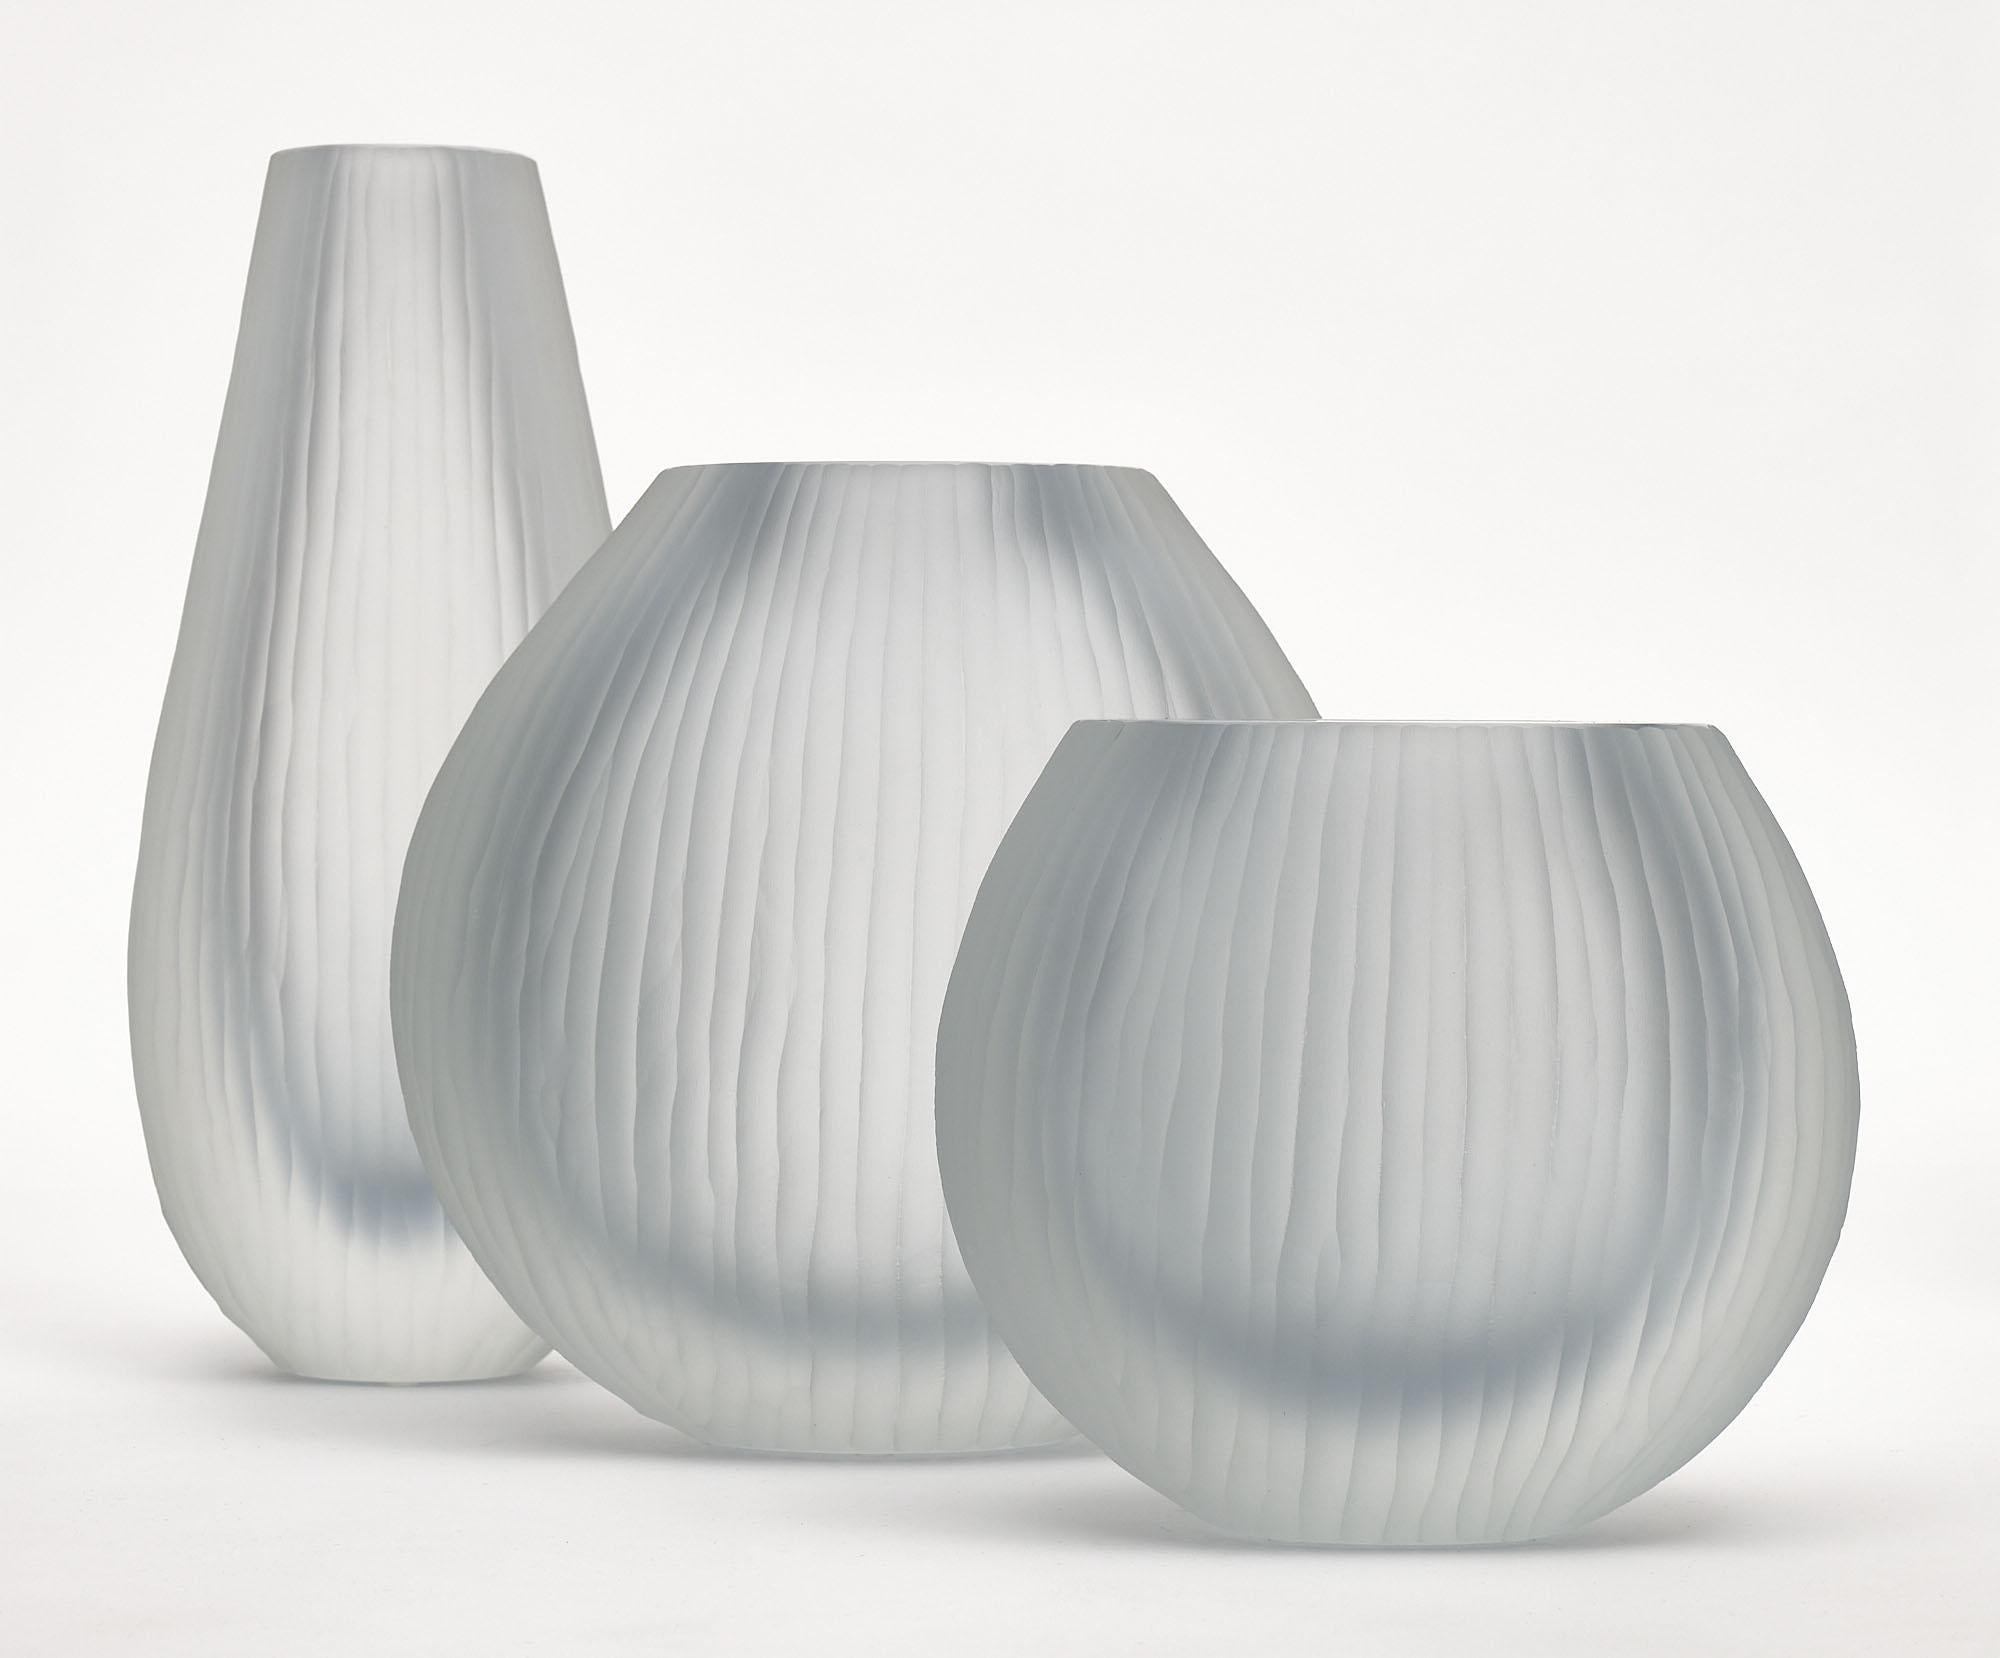 Set of three Murano glass vases in the manner of Tobia Scarpa. The set has been made using the “battuto” or hammered technique. They are in a beautiful light blue-gray tone. The measurements listed are for the tallest vase. The measurements for all